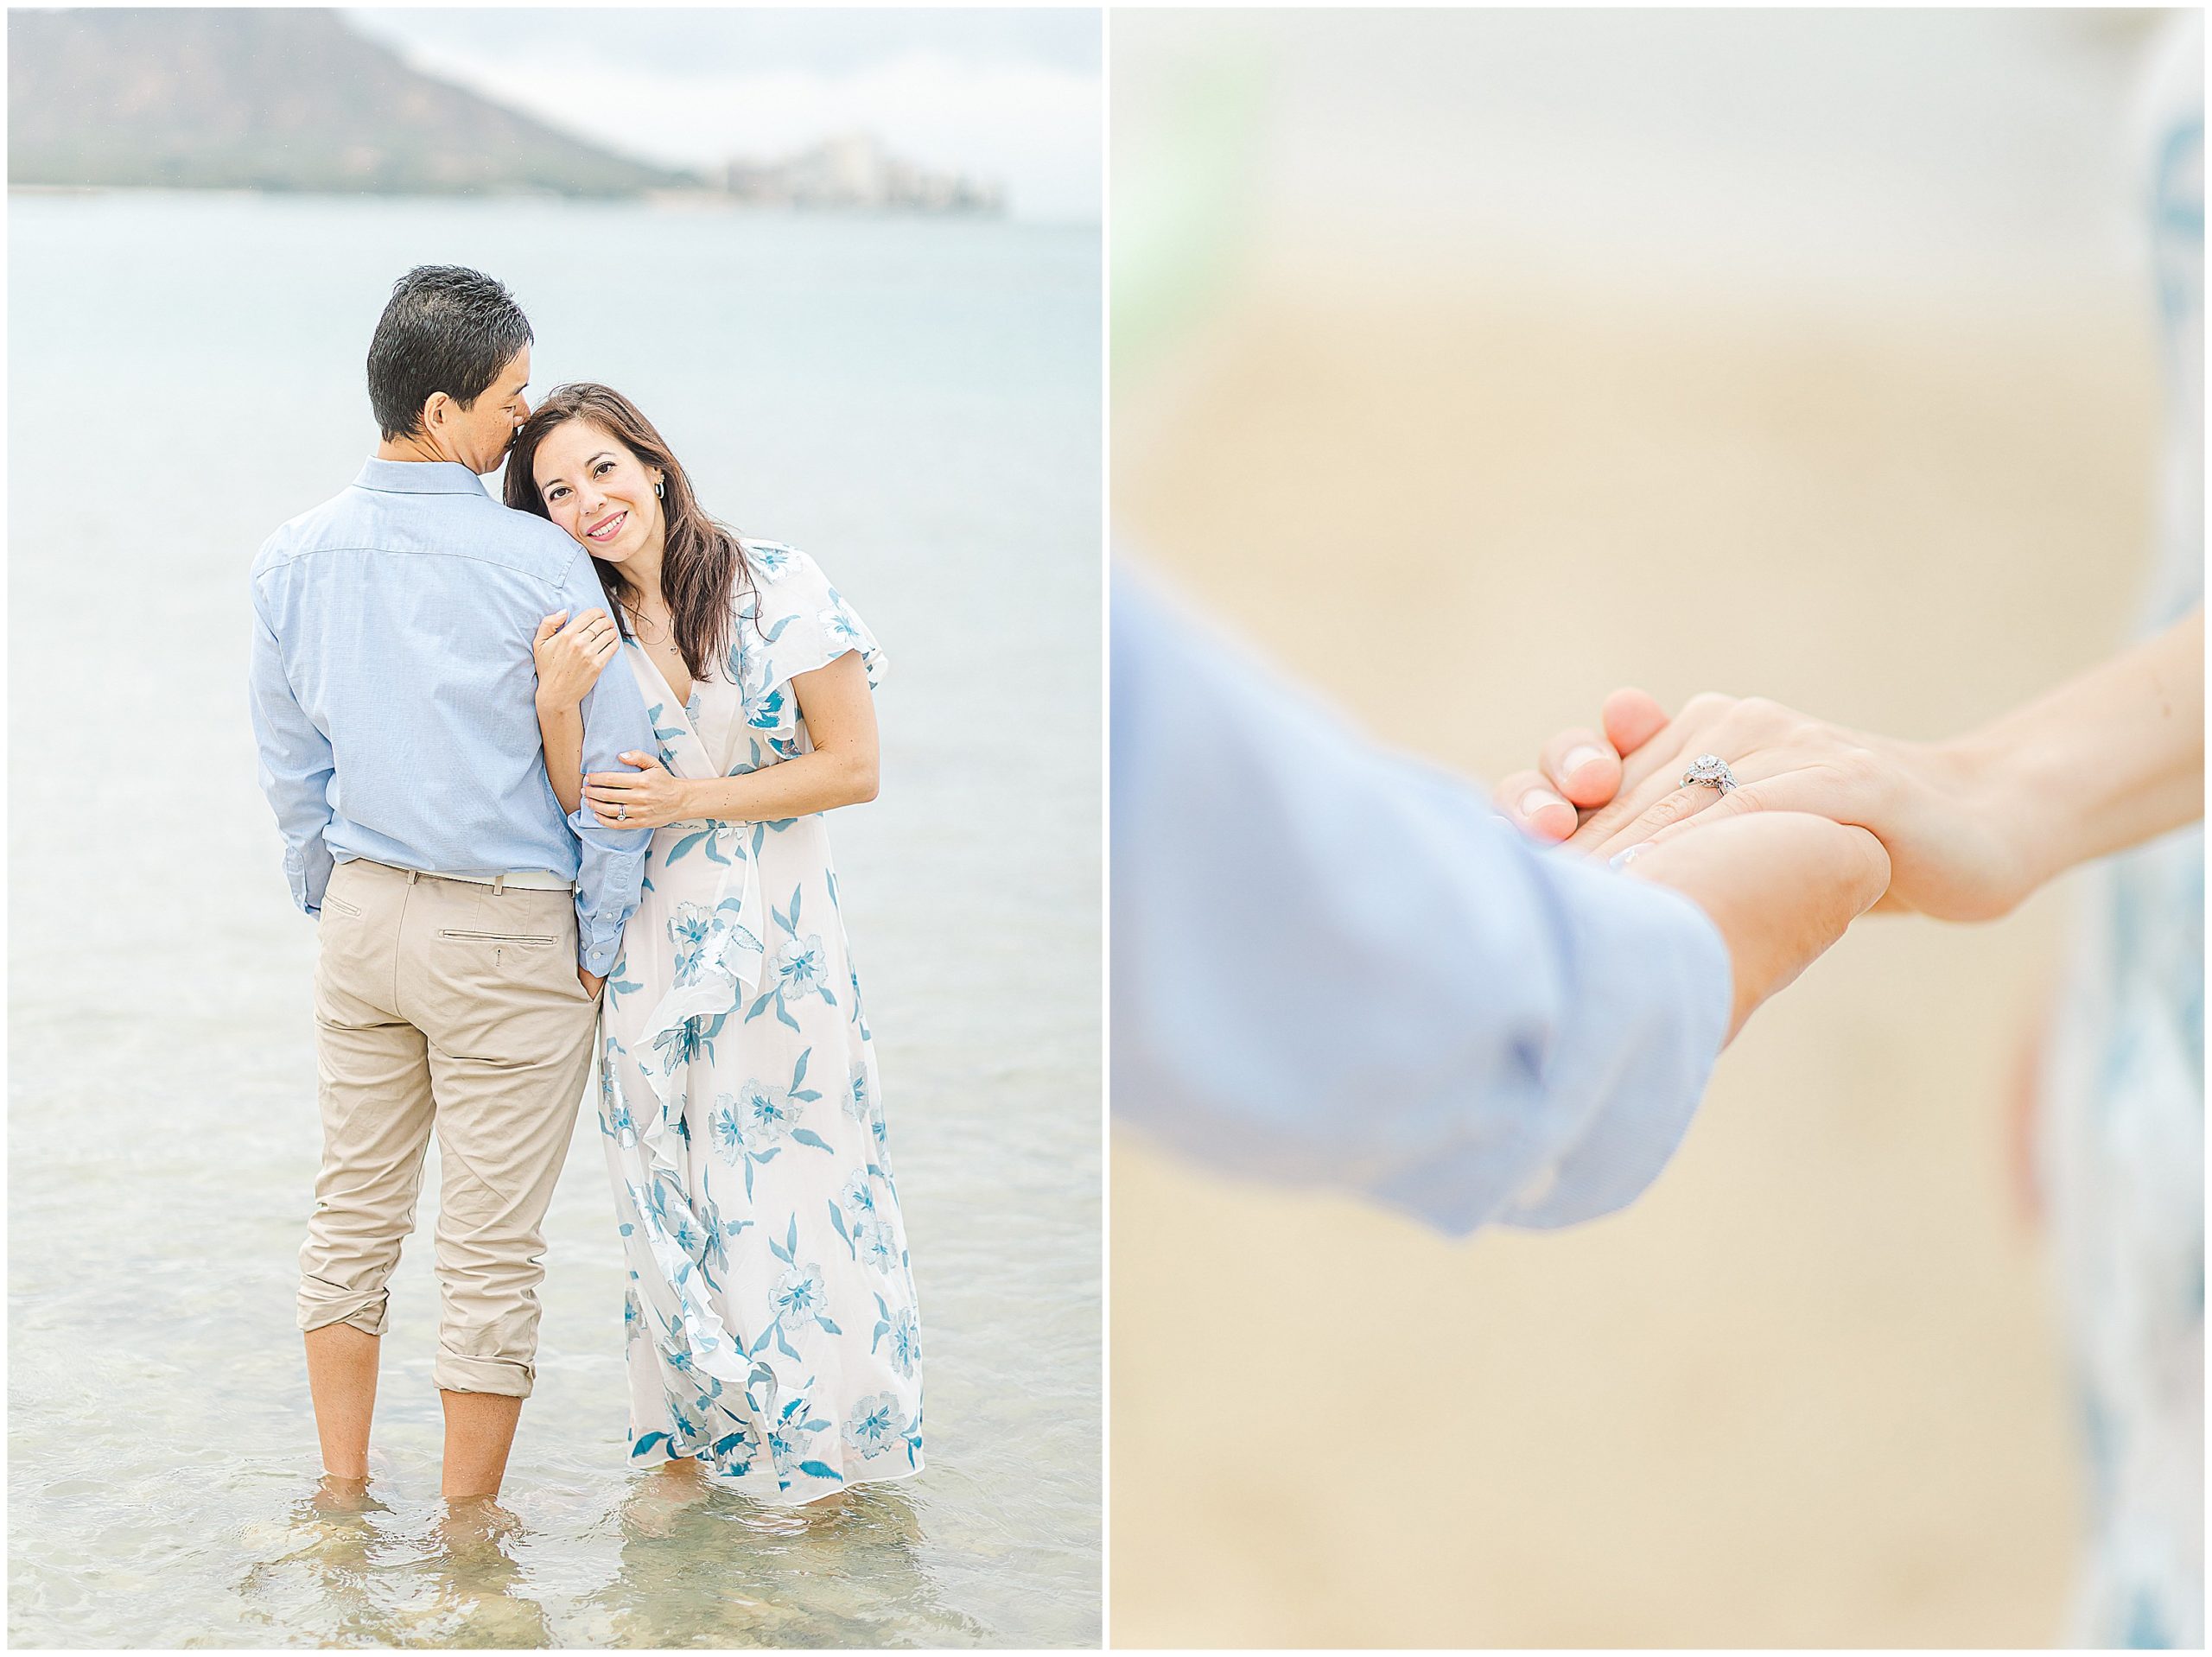 engagement photos on the beach. one image shows the couple standing in the water. the second image is a photo of the couple holding hands.